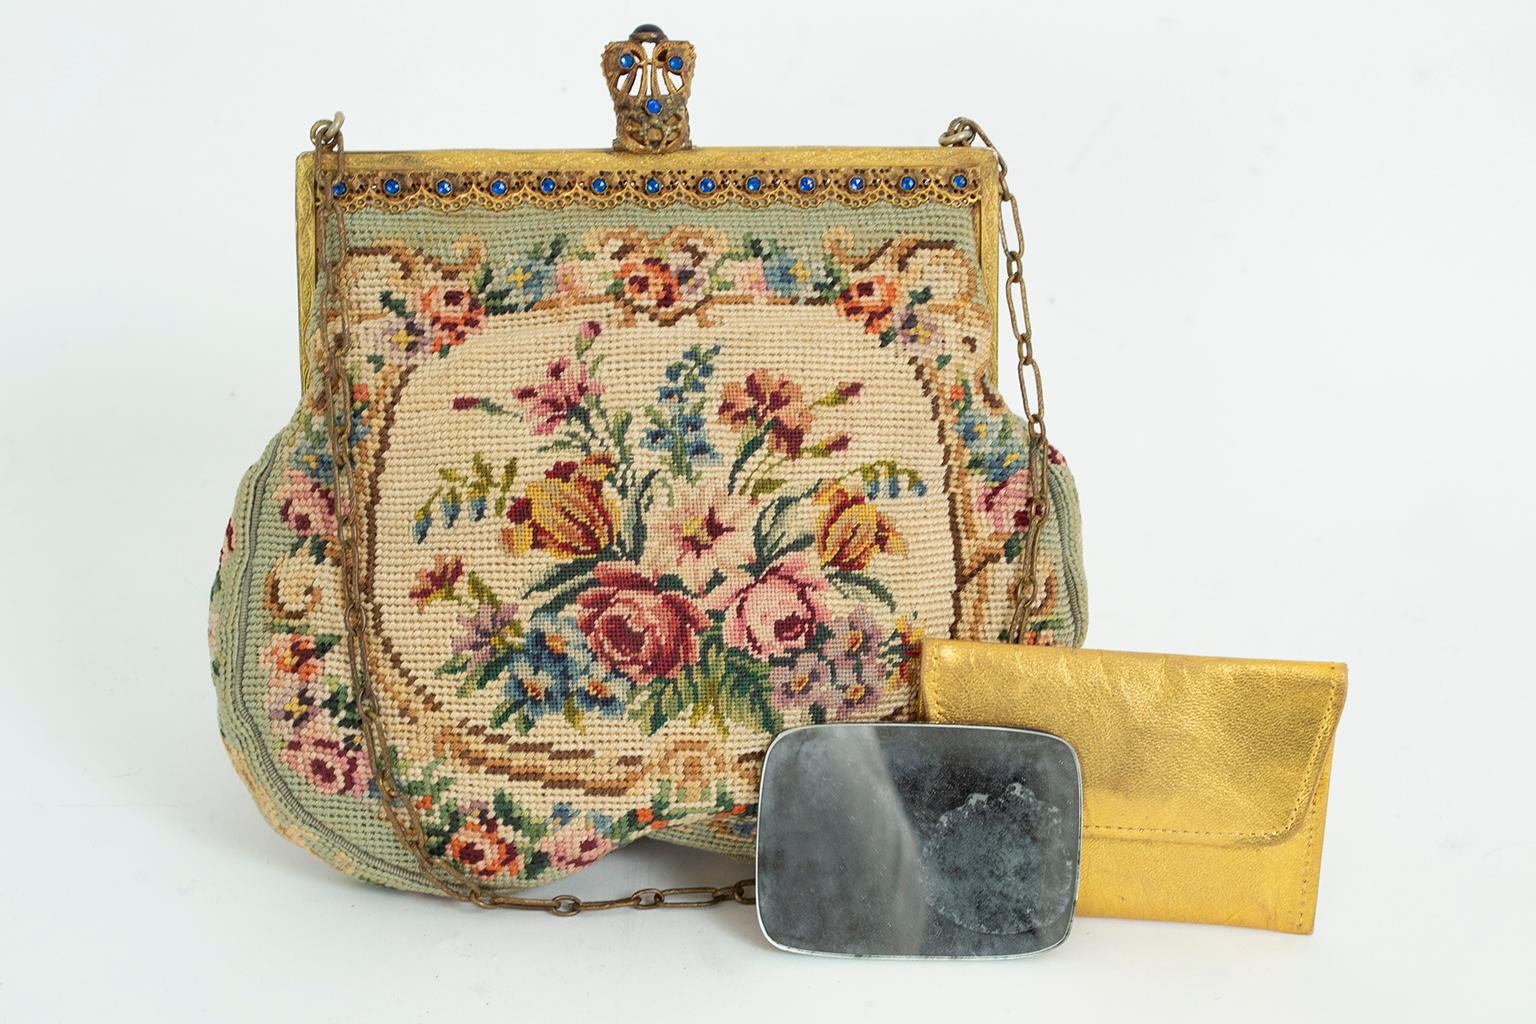 Equally as coveted by the well-bred Victorienne as by the gin-baby flapper, Trinity Plate reticules and minaudières were THE accessory of choice for fashionable women in the early 20th century. Their gilt frames, ornate latches and sumptuous fabrics